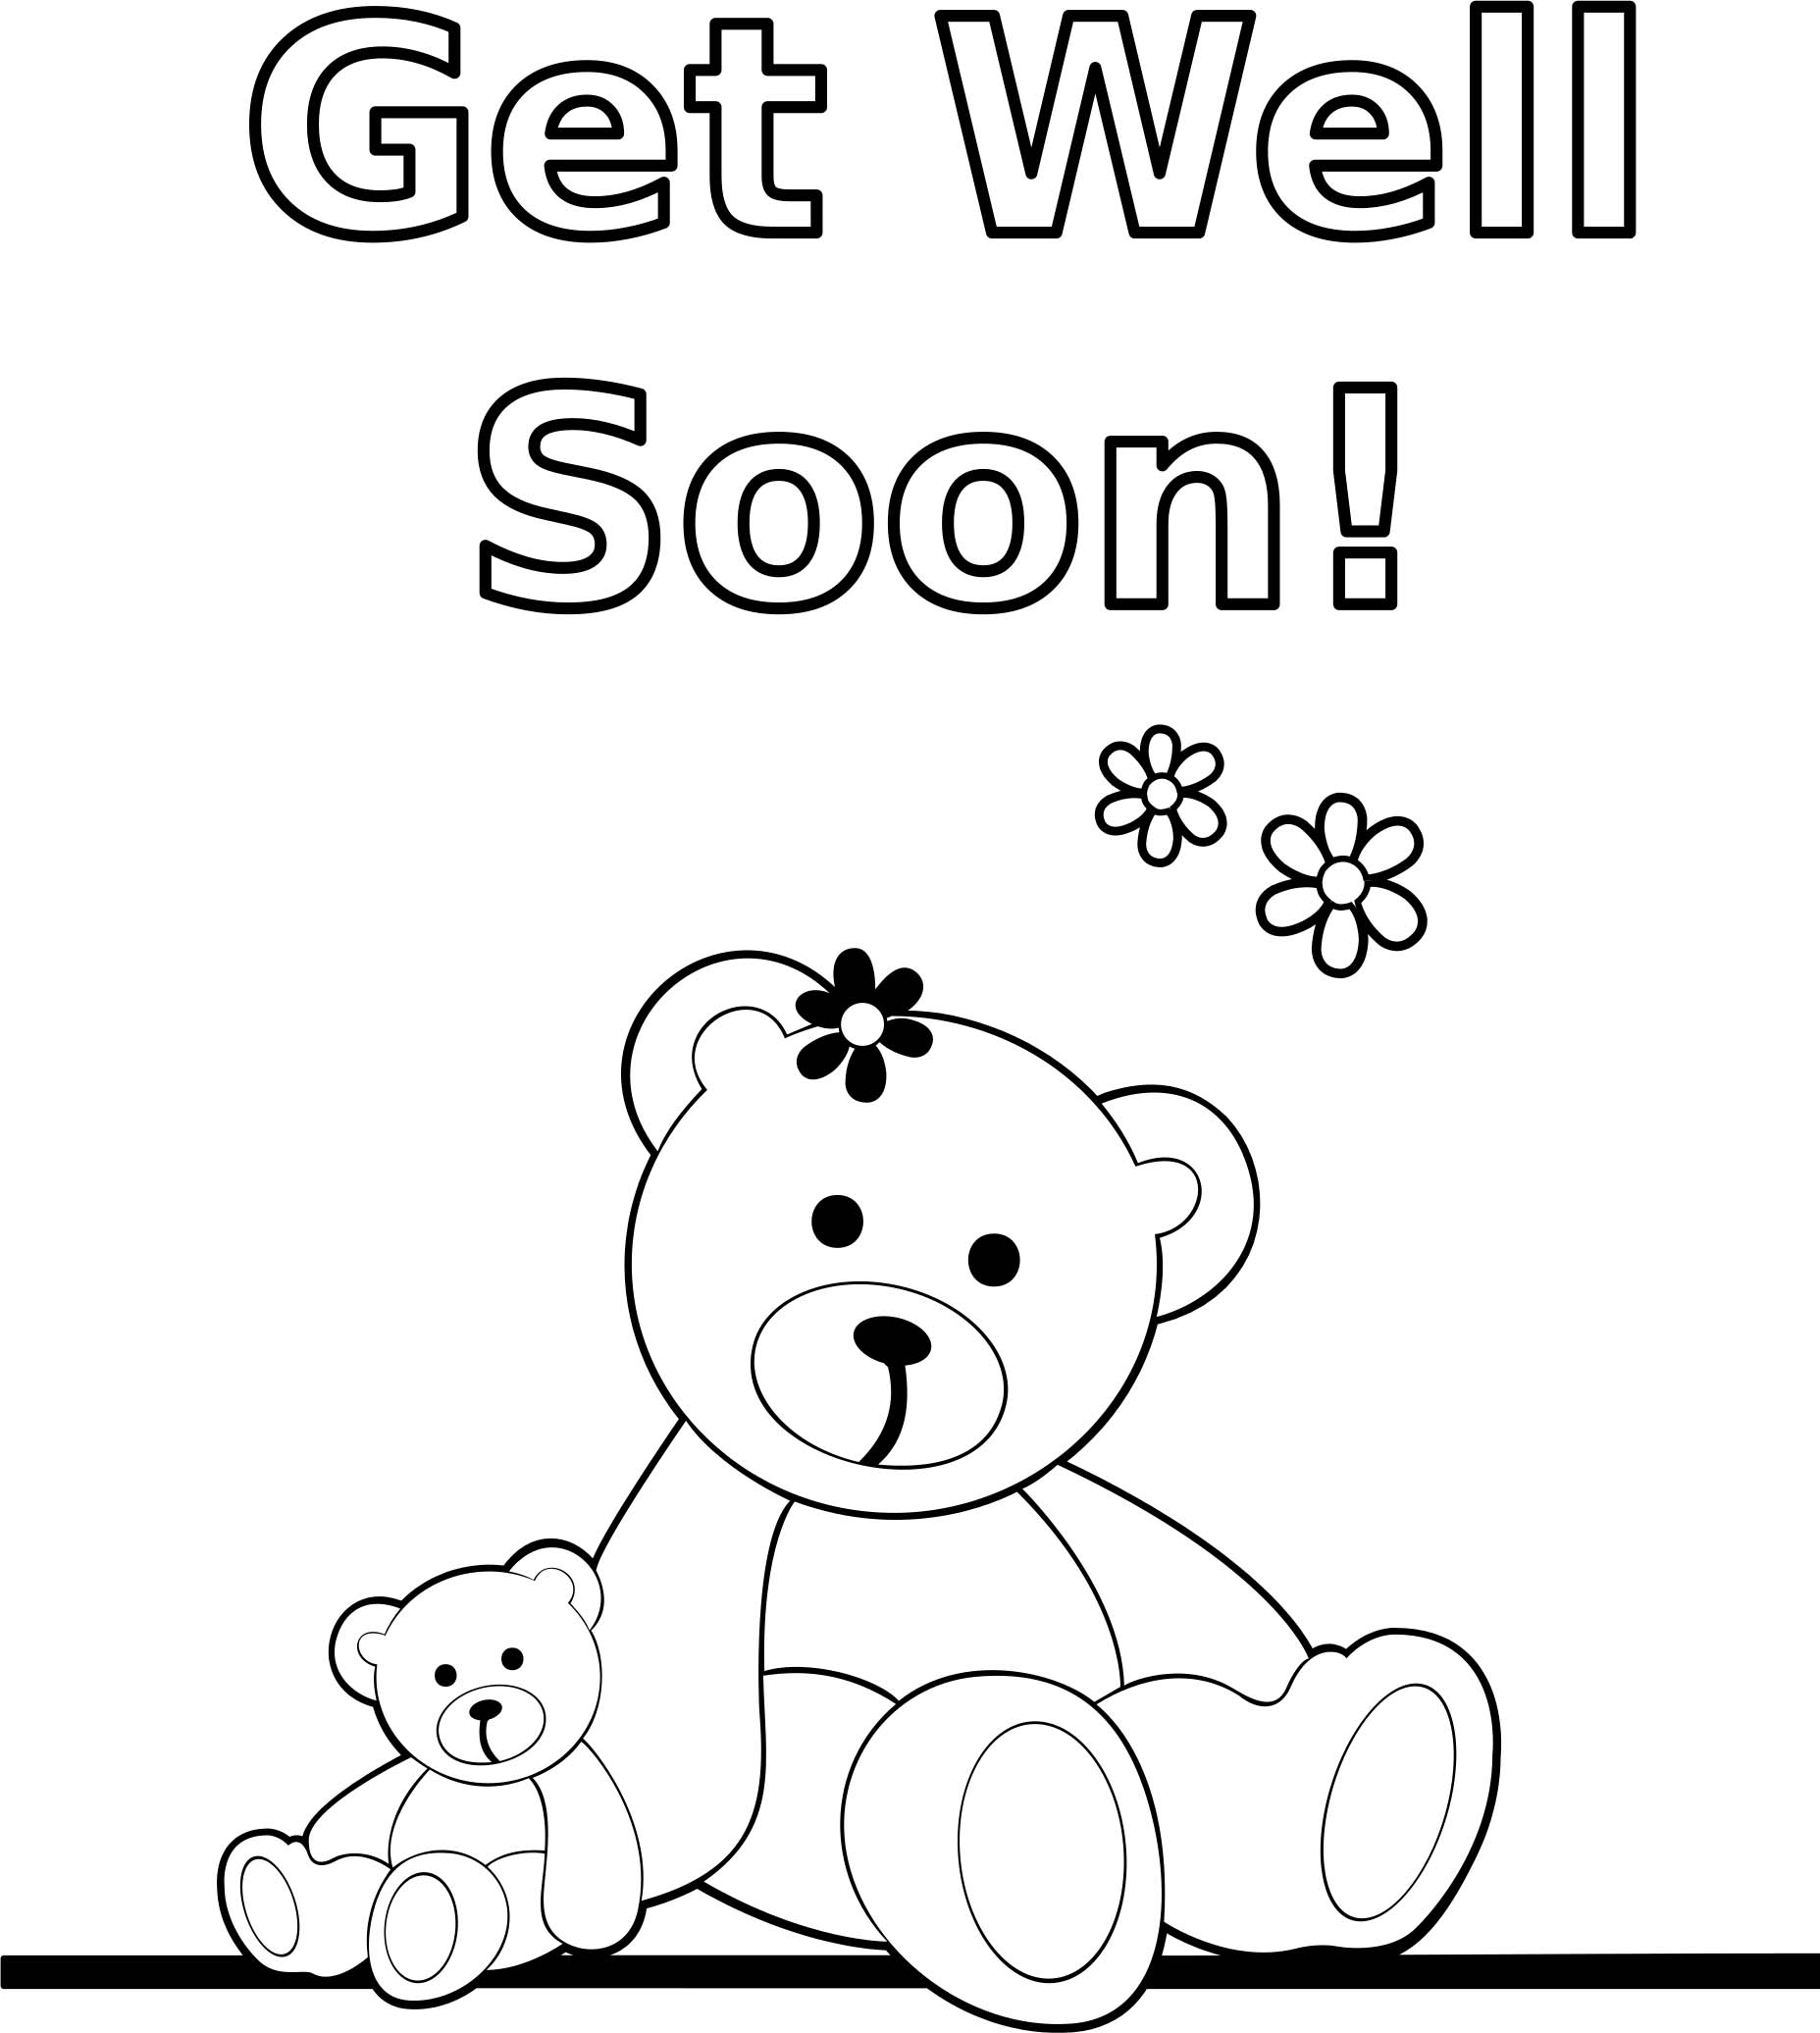 Bear themed Get Well Soon Coloring Sheet for Kids